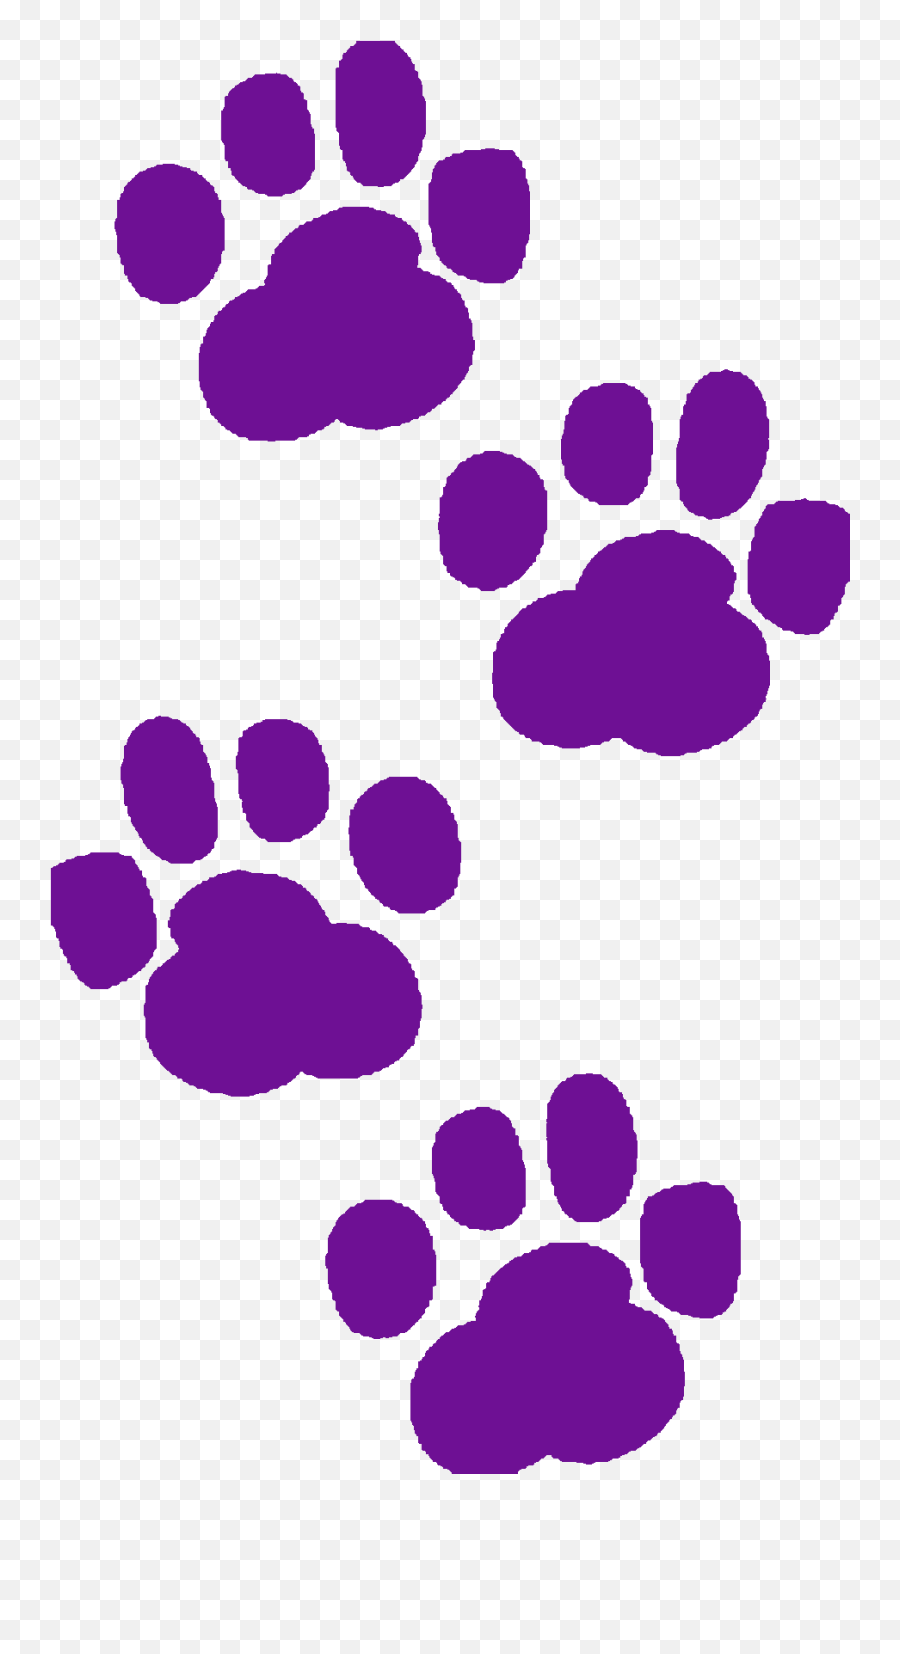 Canine Craze A High Performance Yet Personal Dog School - Drawn Paw Prints Emoji,Video Of Taking Dog Emoji And Making Girl With Shirt Up